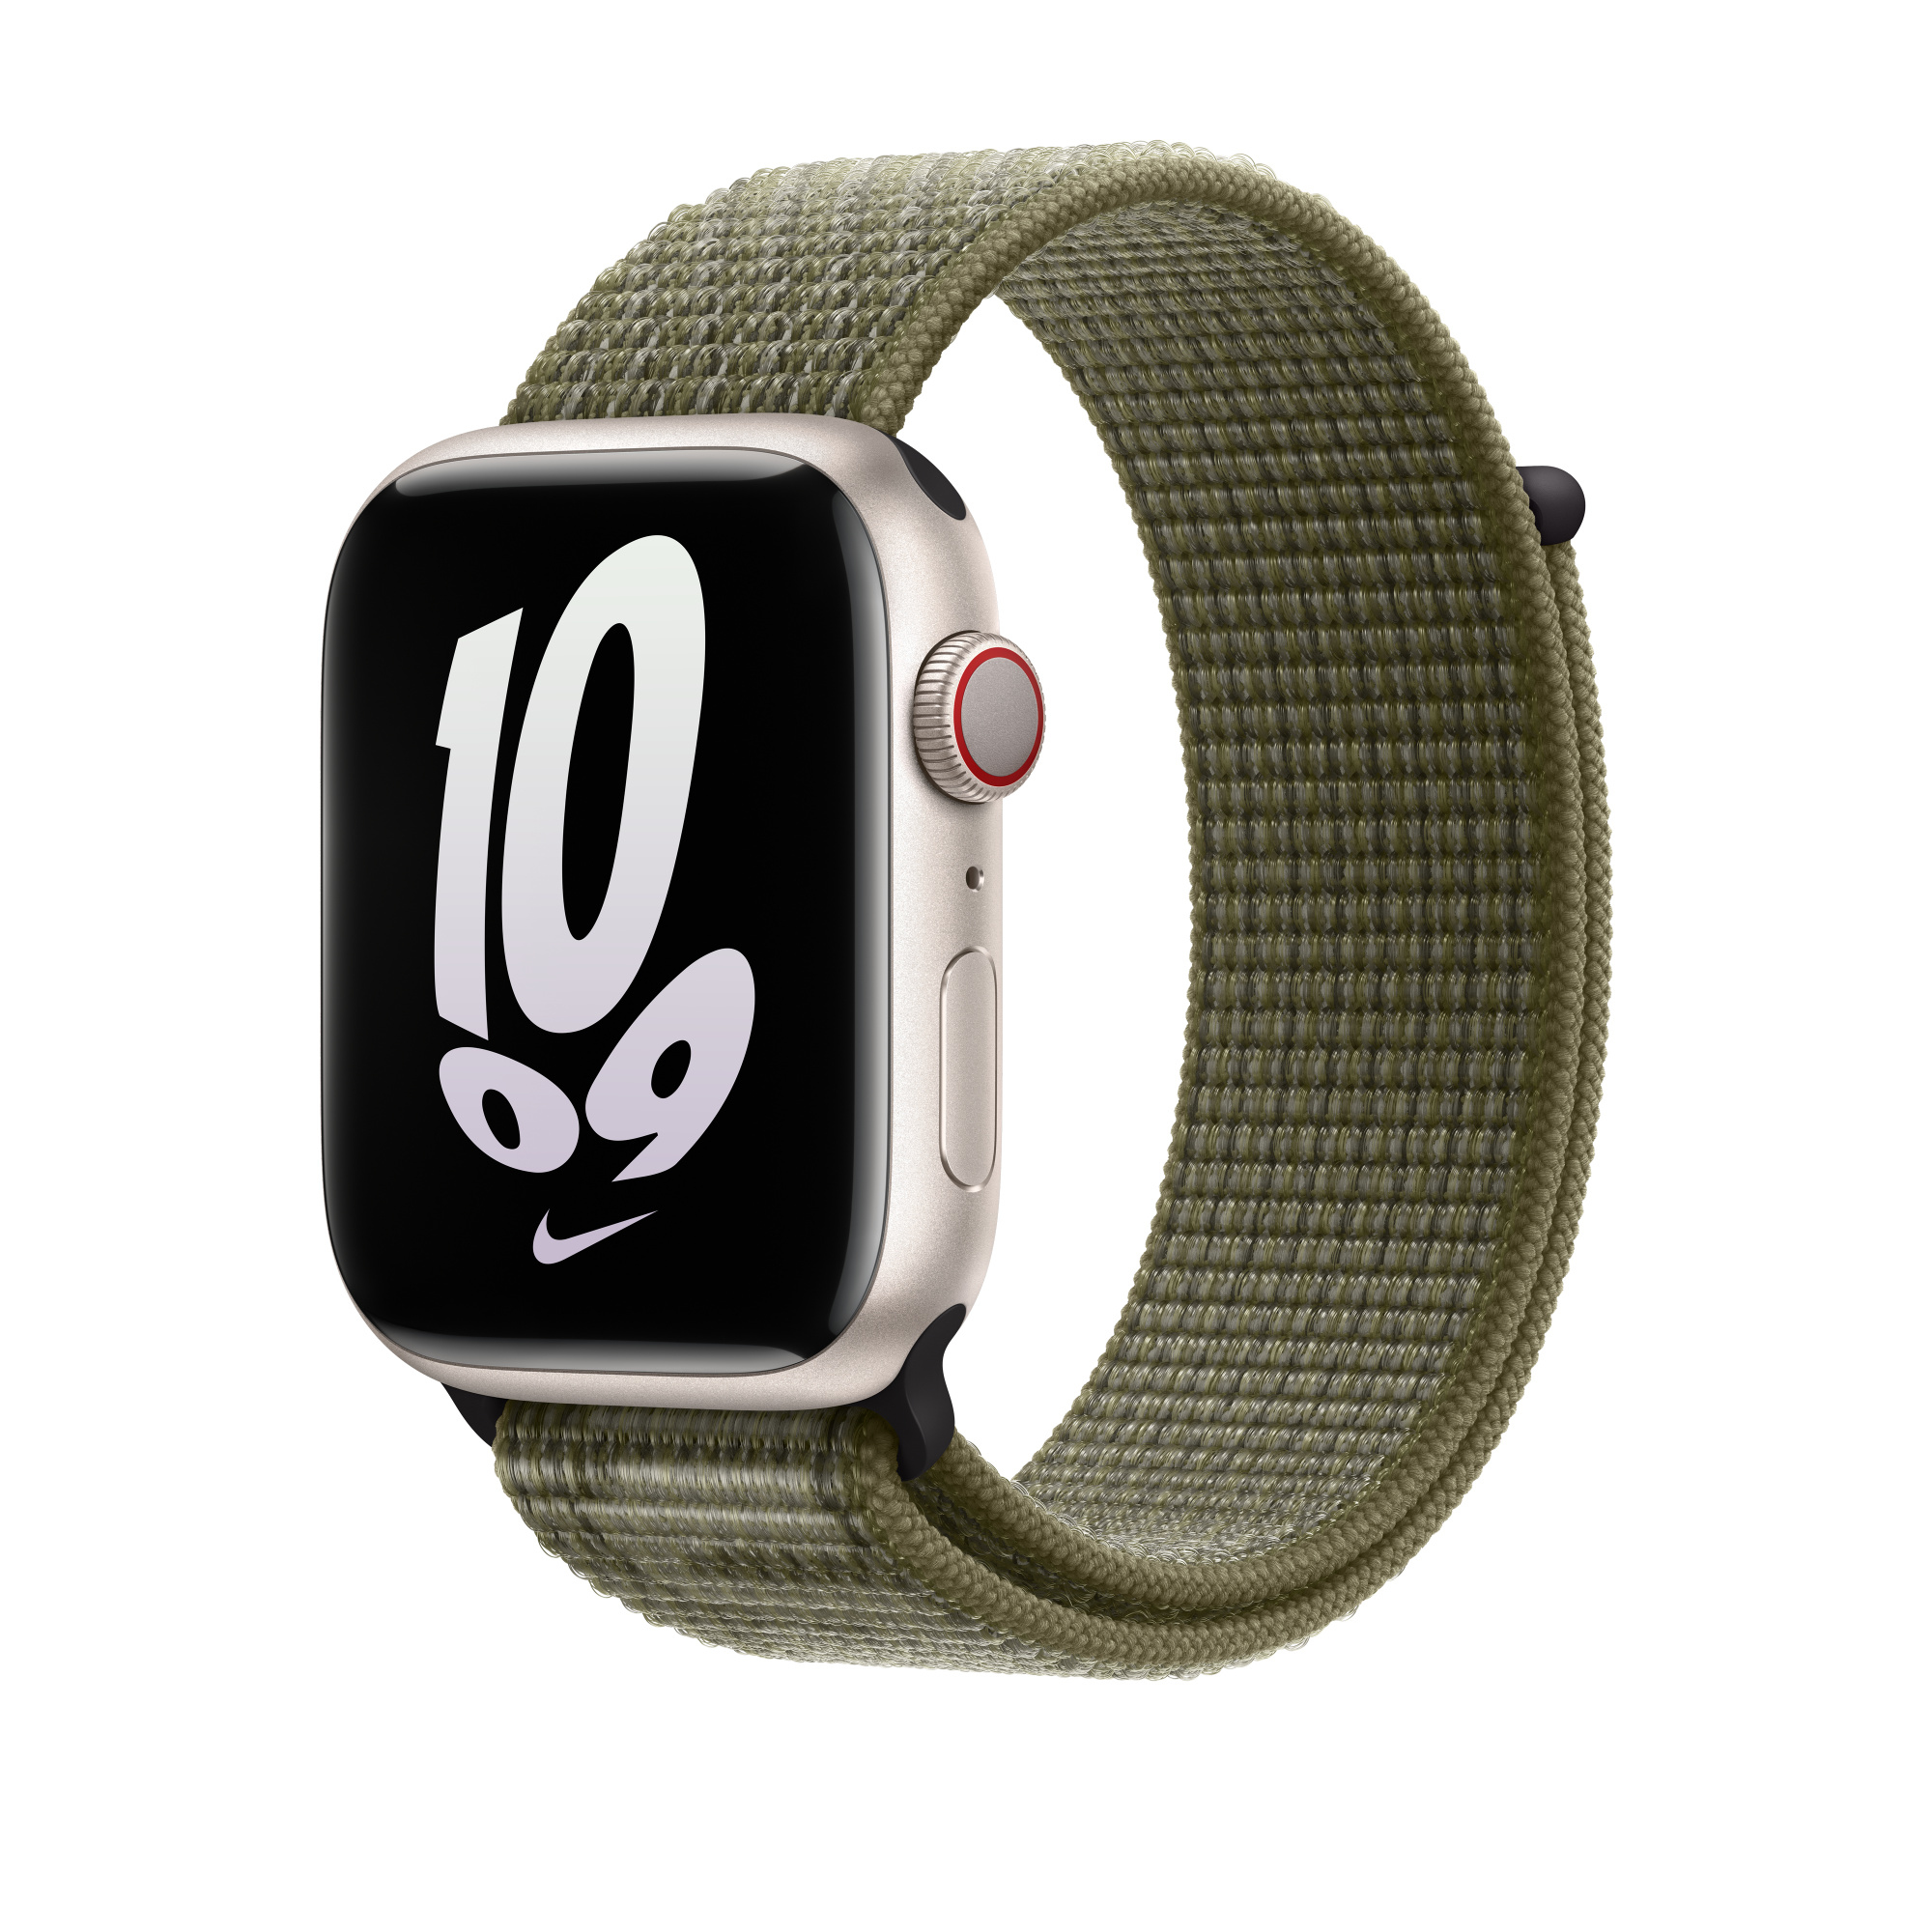 Photos - Smartwatch Band / Strap Apple MPJ23ZM/A Smart Wearable Accessories Band Green, White Nylon 